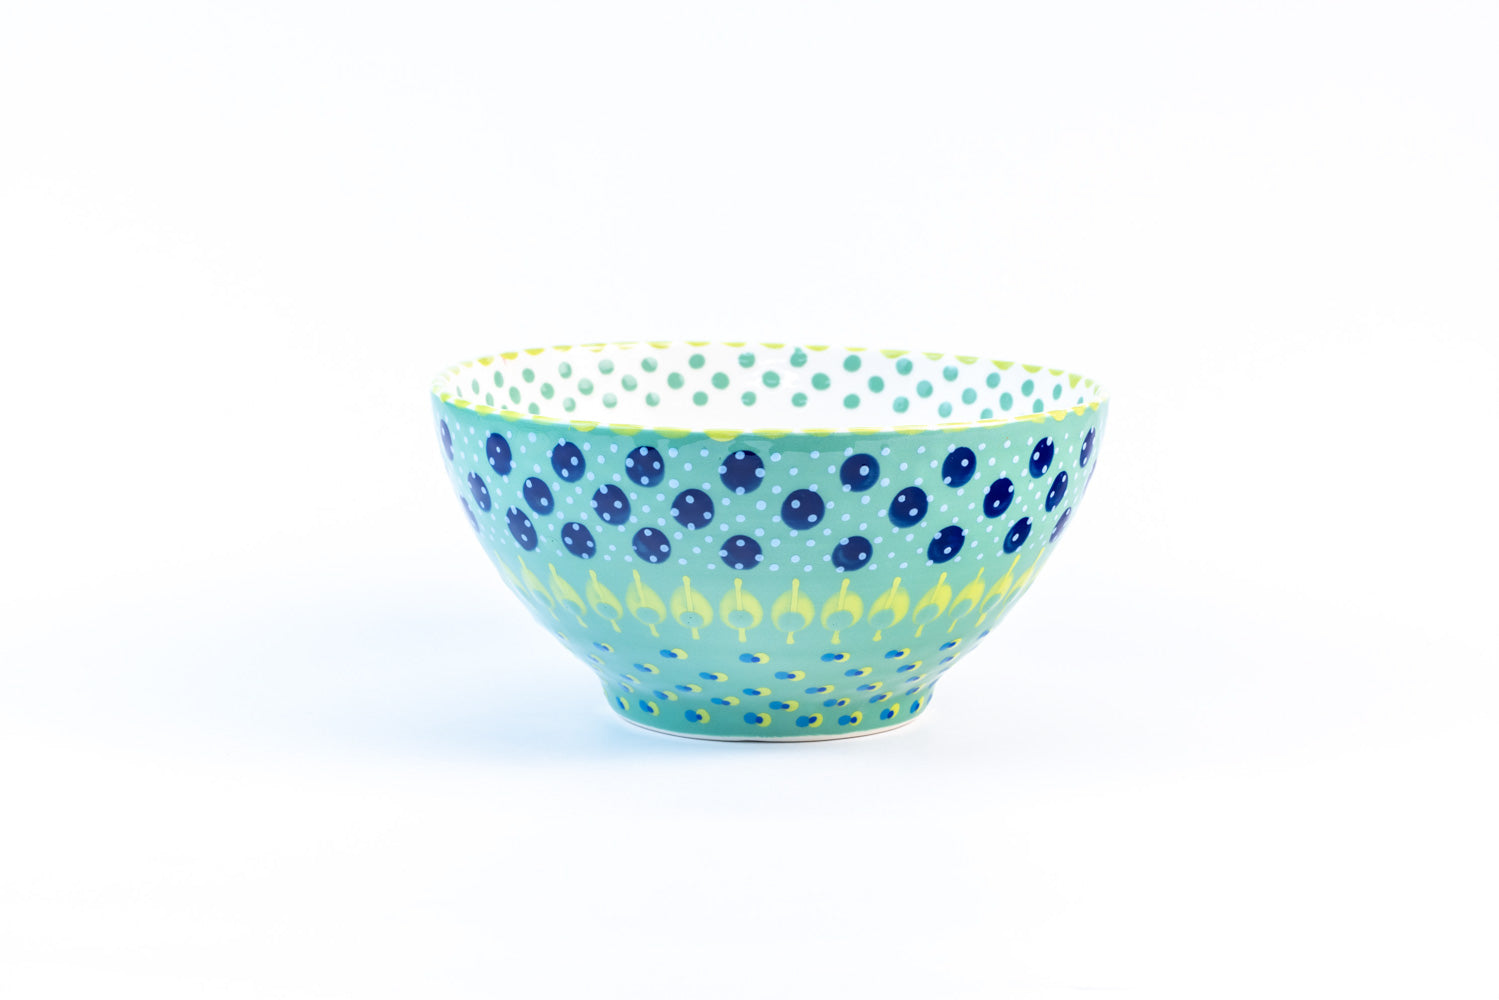 Ceramic serving bowl with base color of Jasper Green.  Blue. Dots & Stripes painted on top in fun colors of yellow, turquoise, orange & red. White inside the bowl.